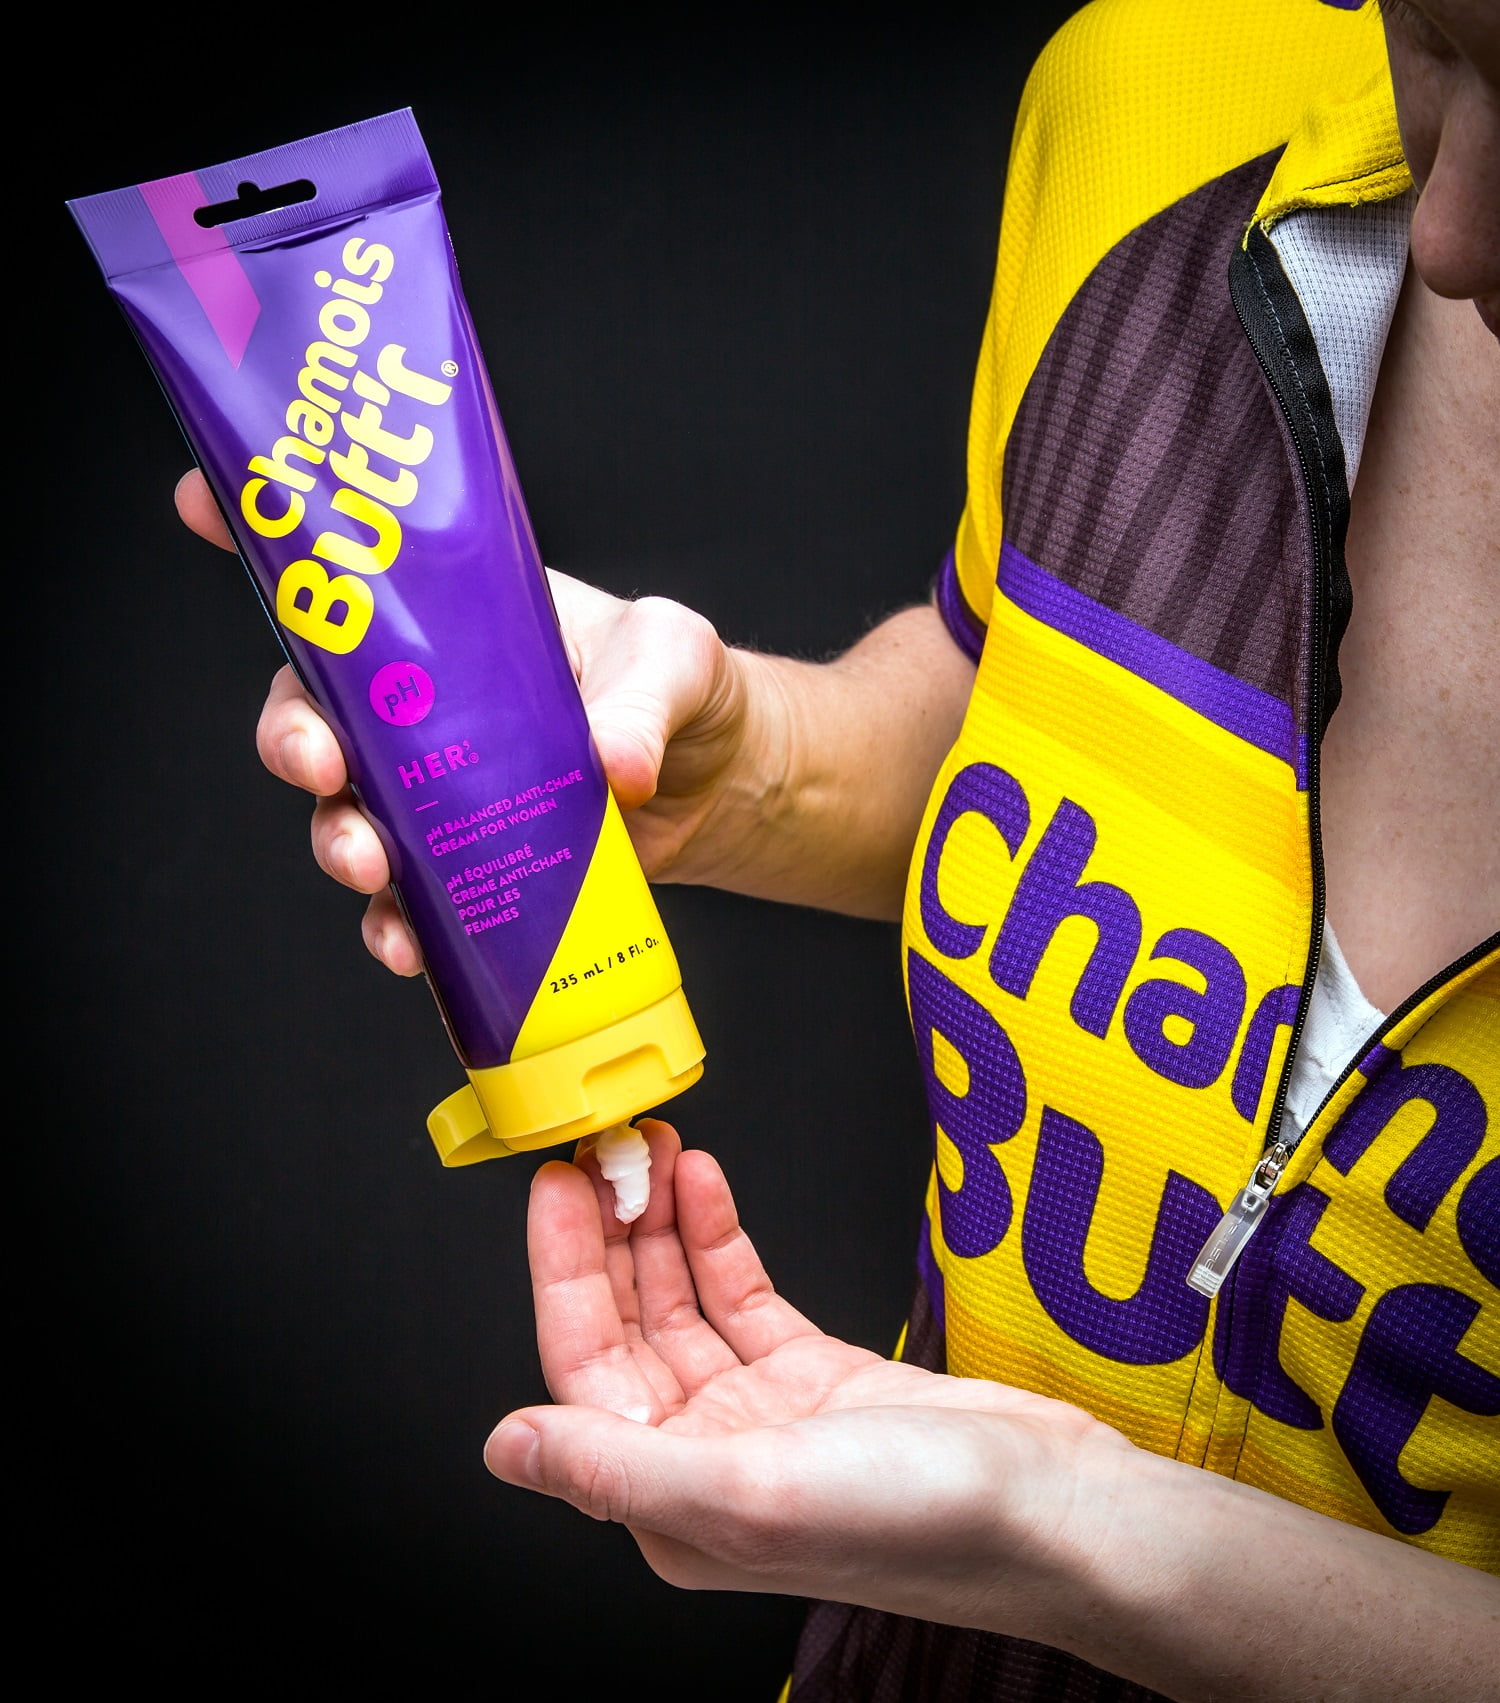  Chamois Butt'r Original Anti-Chafe Cream, 8 oz tube & Body  Glide For Her Anti Chafe Balm: anti chafing stick with added emollients.  Prevent rubbing leading to chafing, raw skin, and irritation 